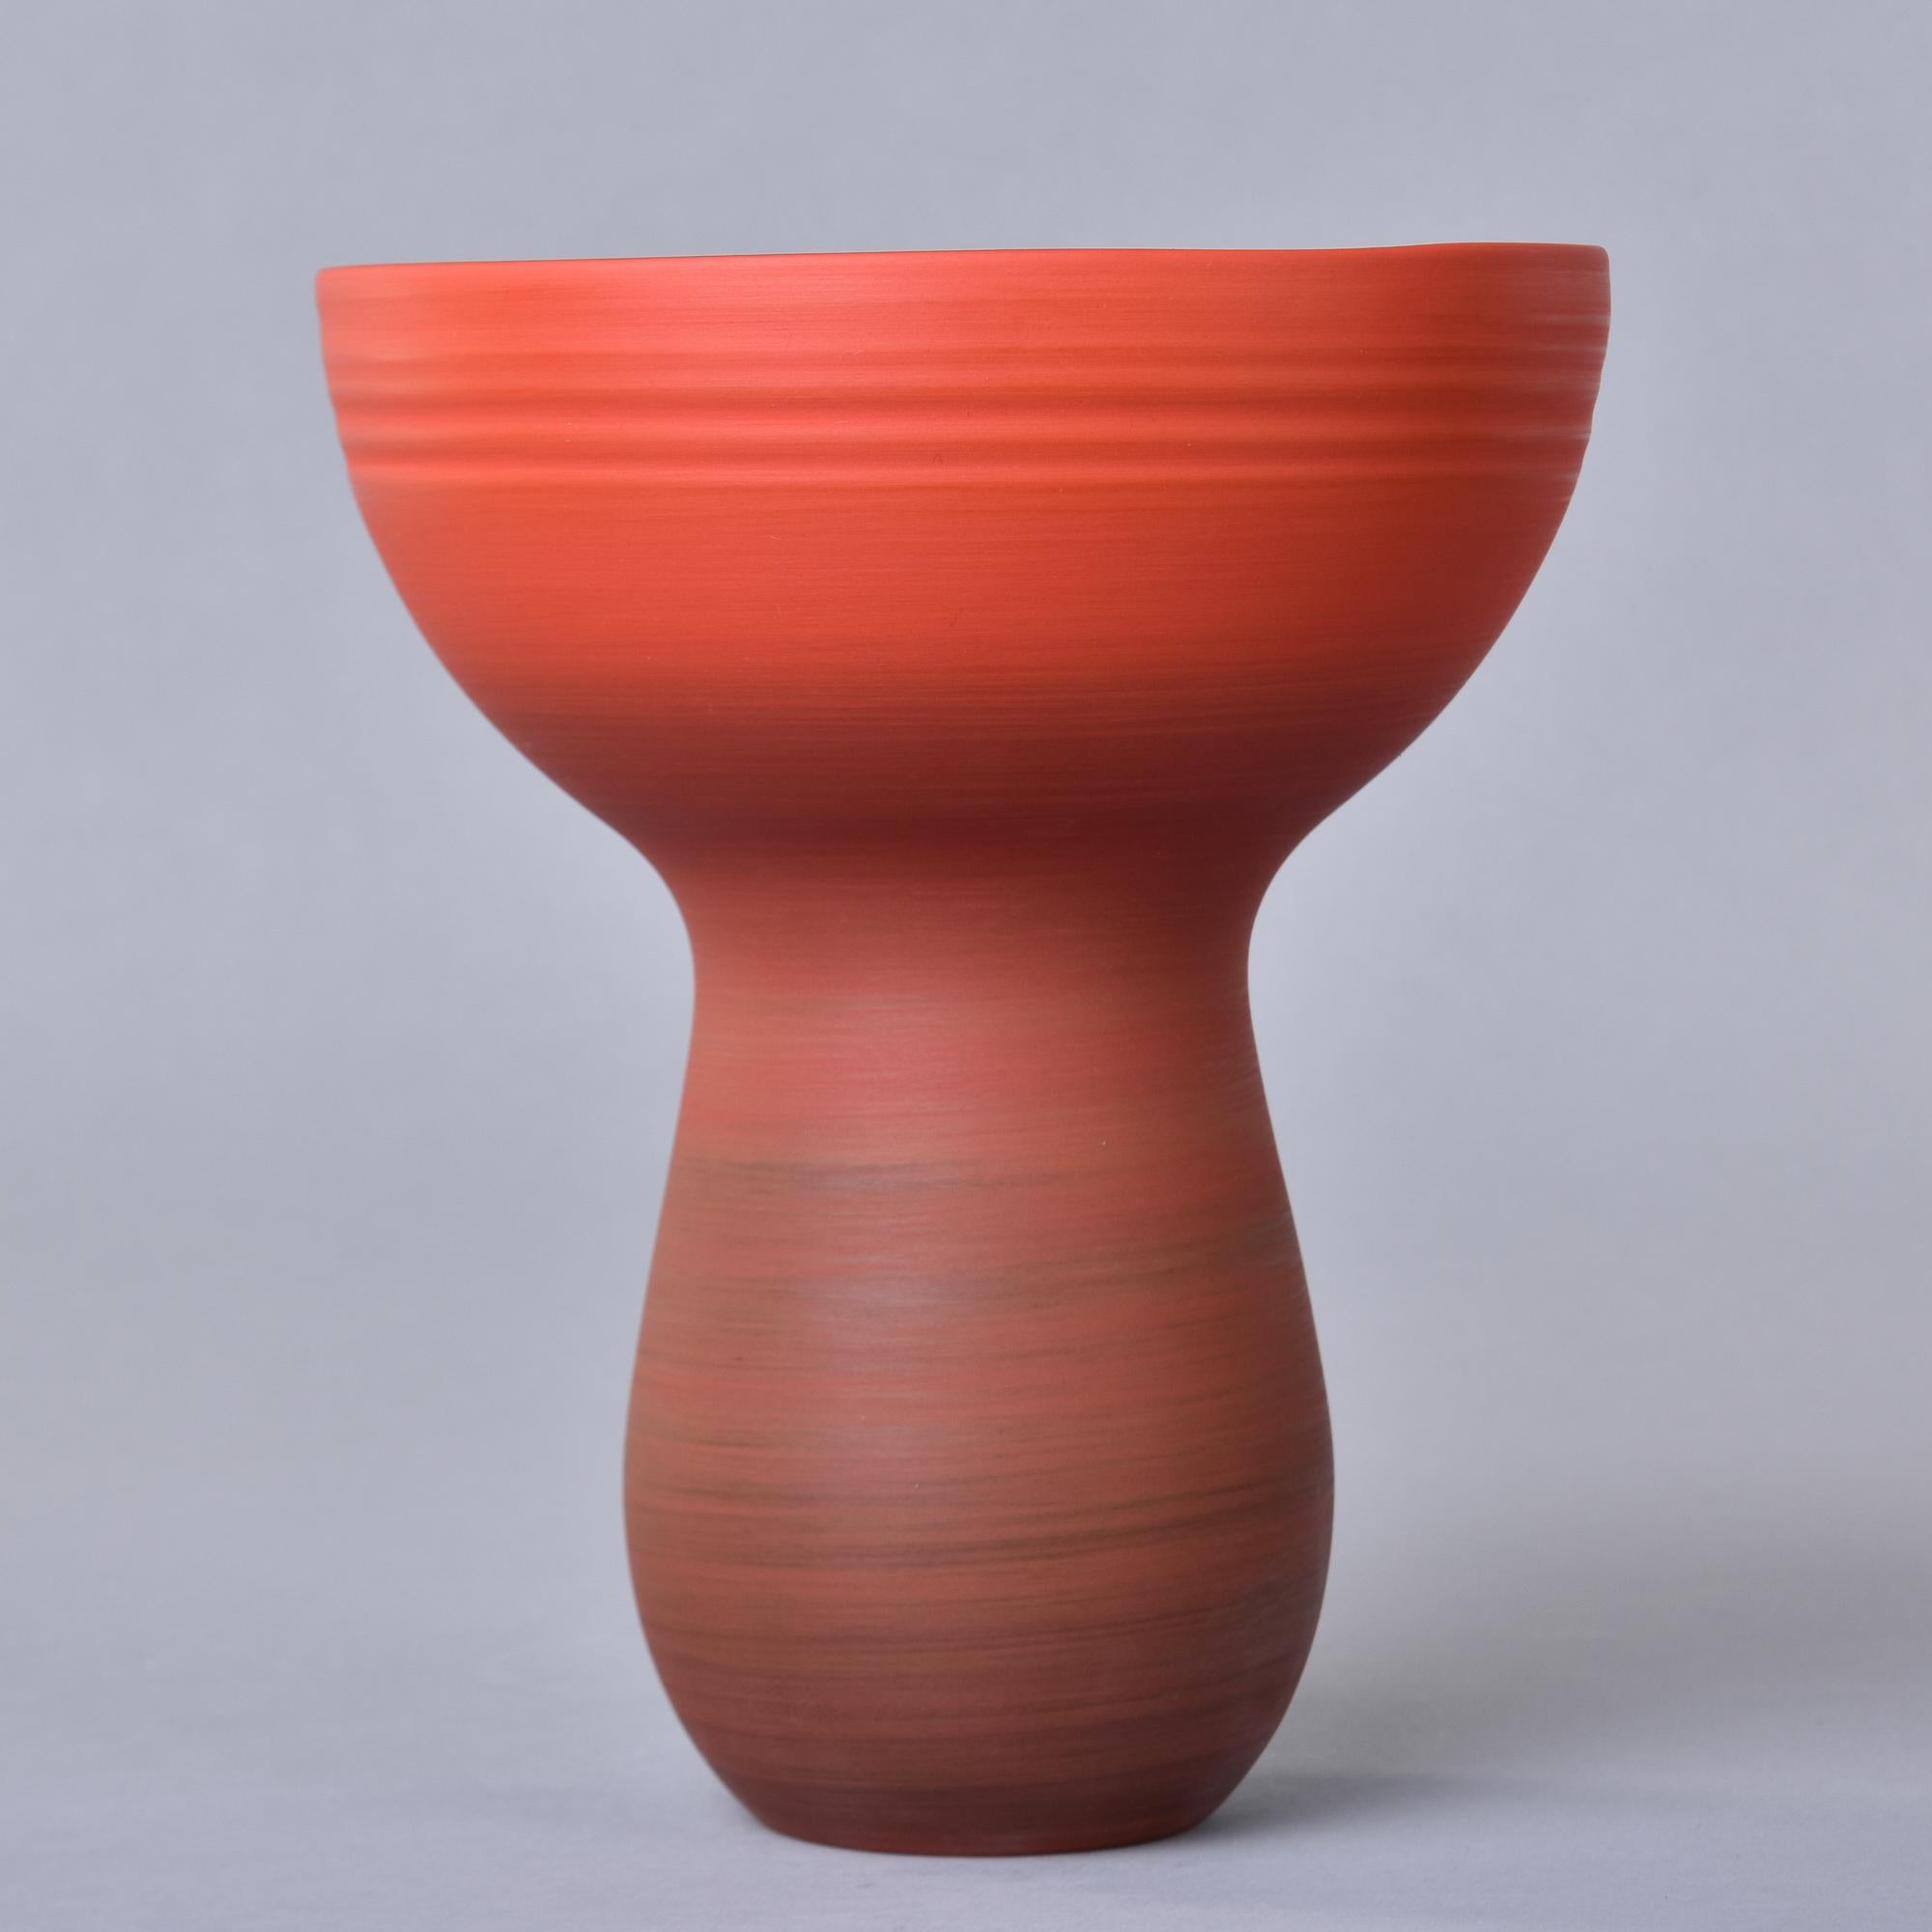 New and made in Italy by Rina Menardi, this bouquet vase stands 10” tall. This is finely crafted pottery has a dark orange-red ombre glaze inside and out, thin walls, and a sculptural shape with a narrow, rounded base and bowl-like rim. Signed by